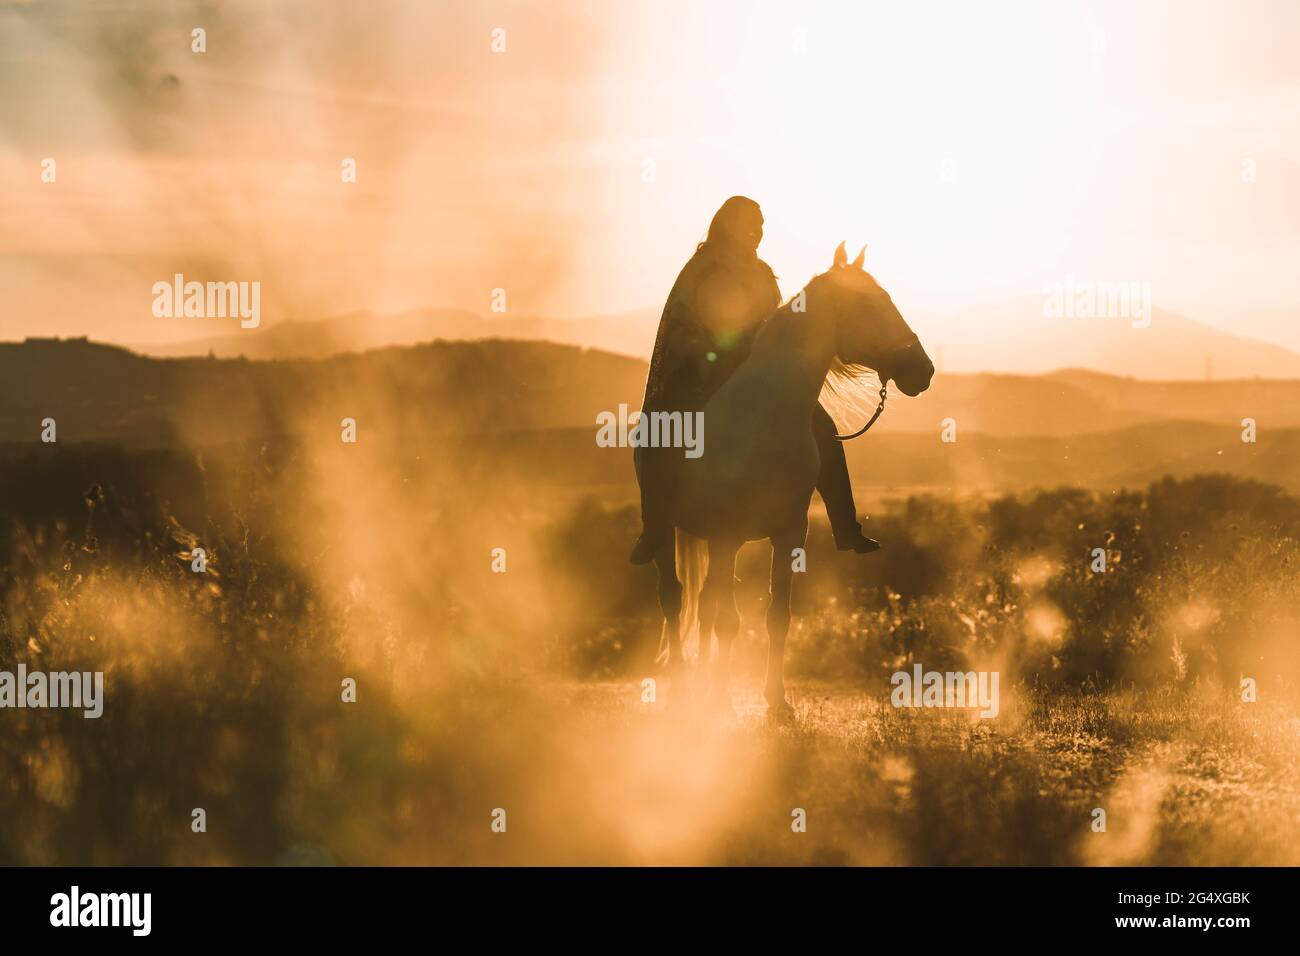 Woman riding horse on field during sunset Stock Photo